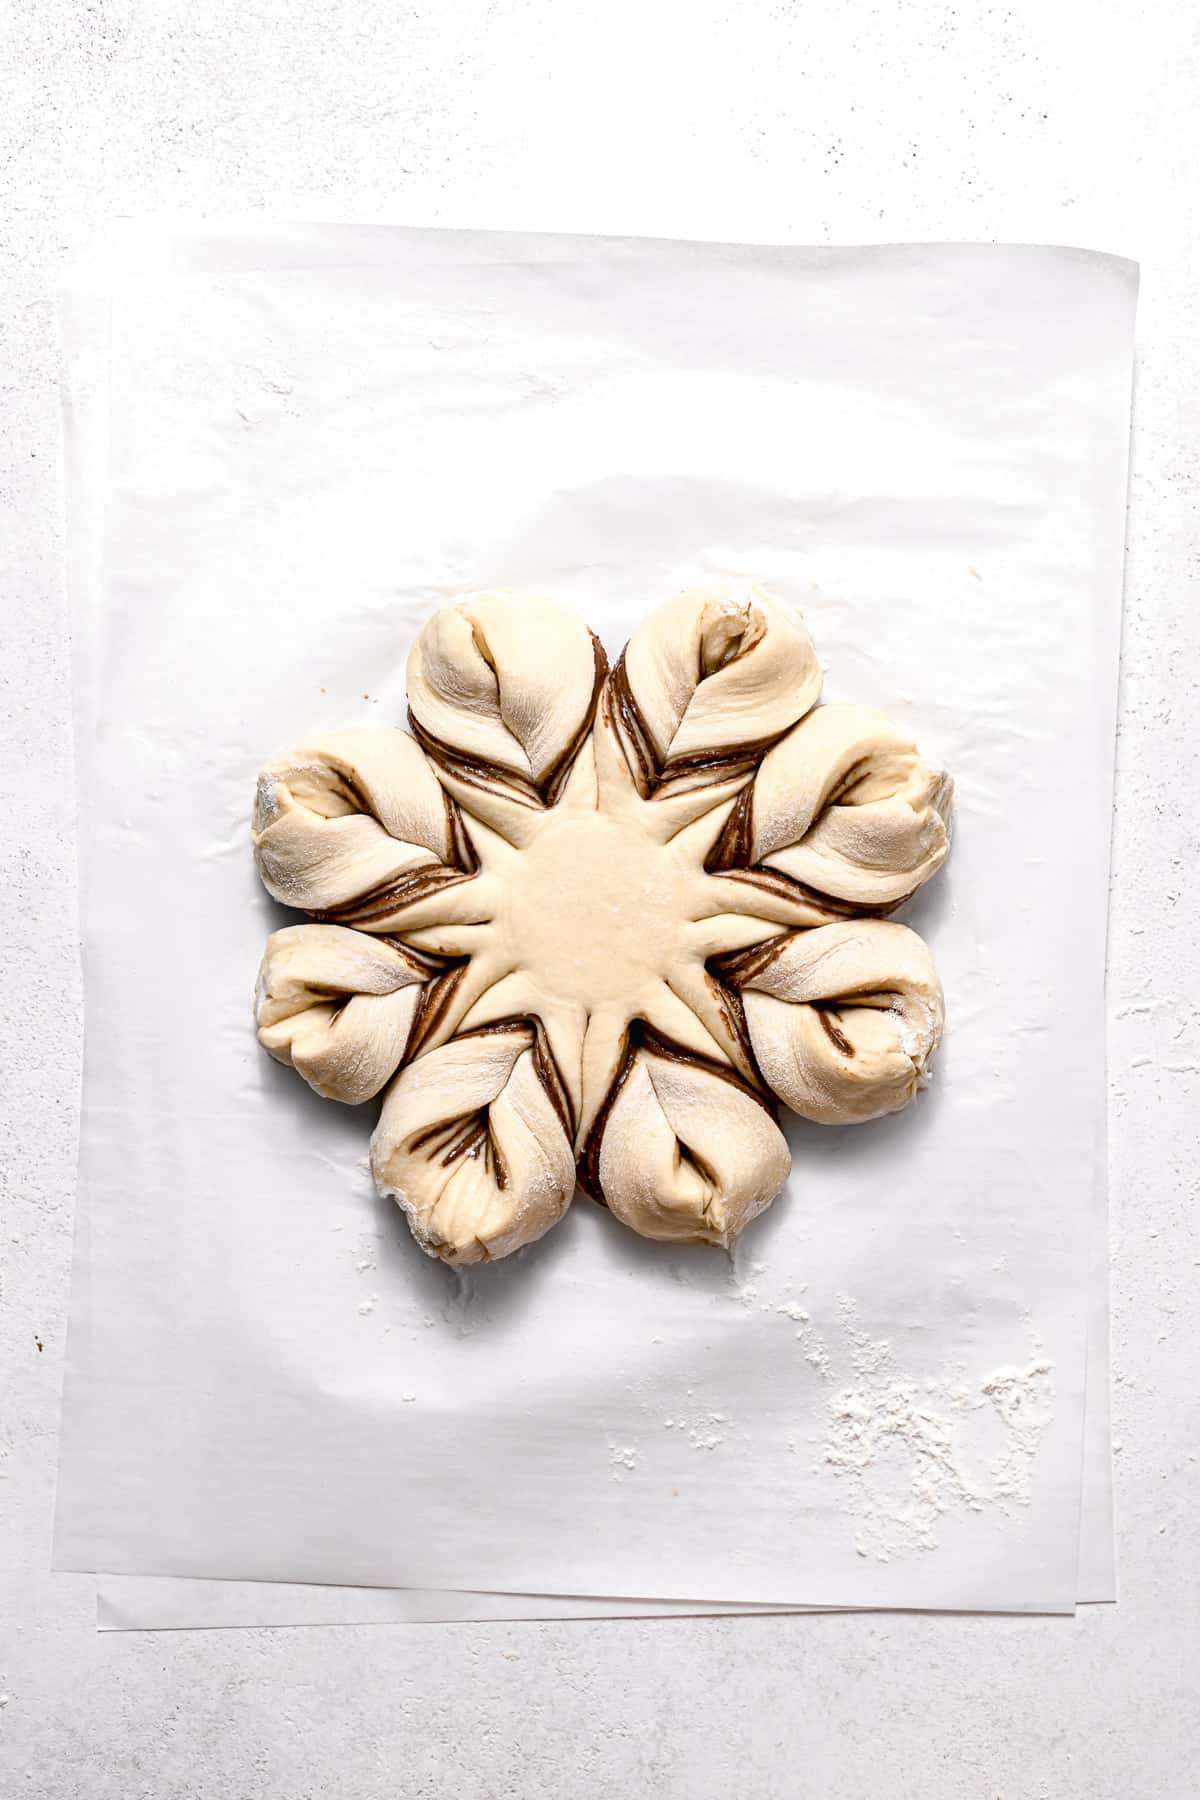 shaped star bread on parchment paper.